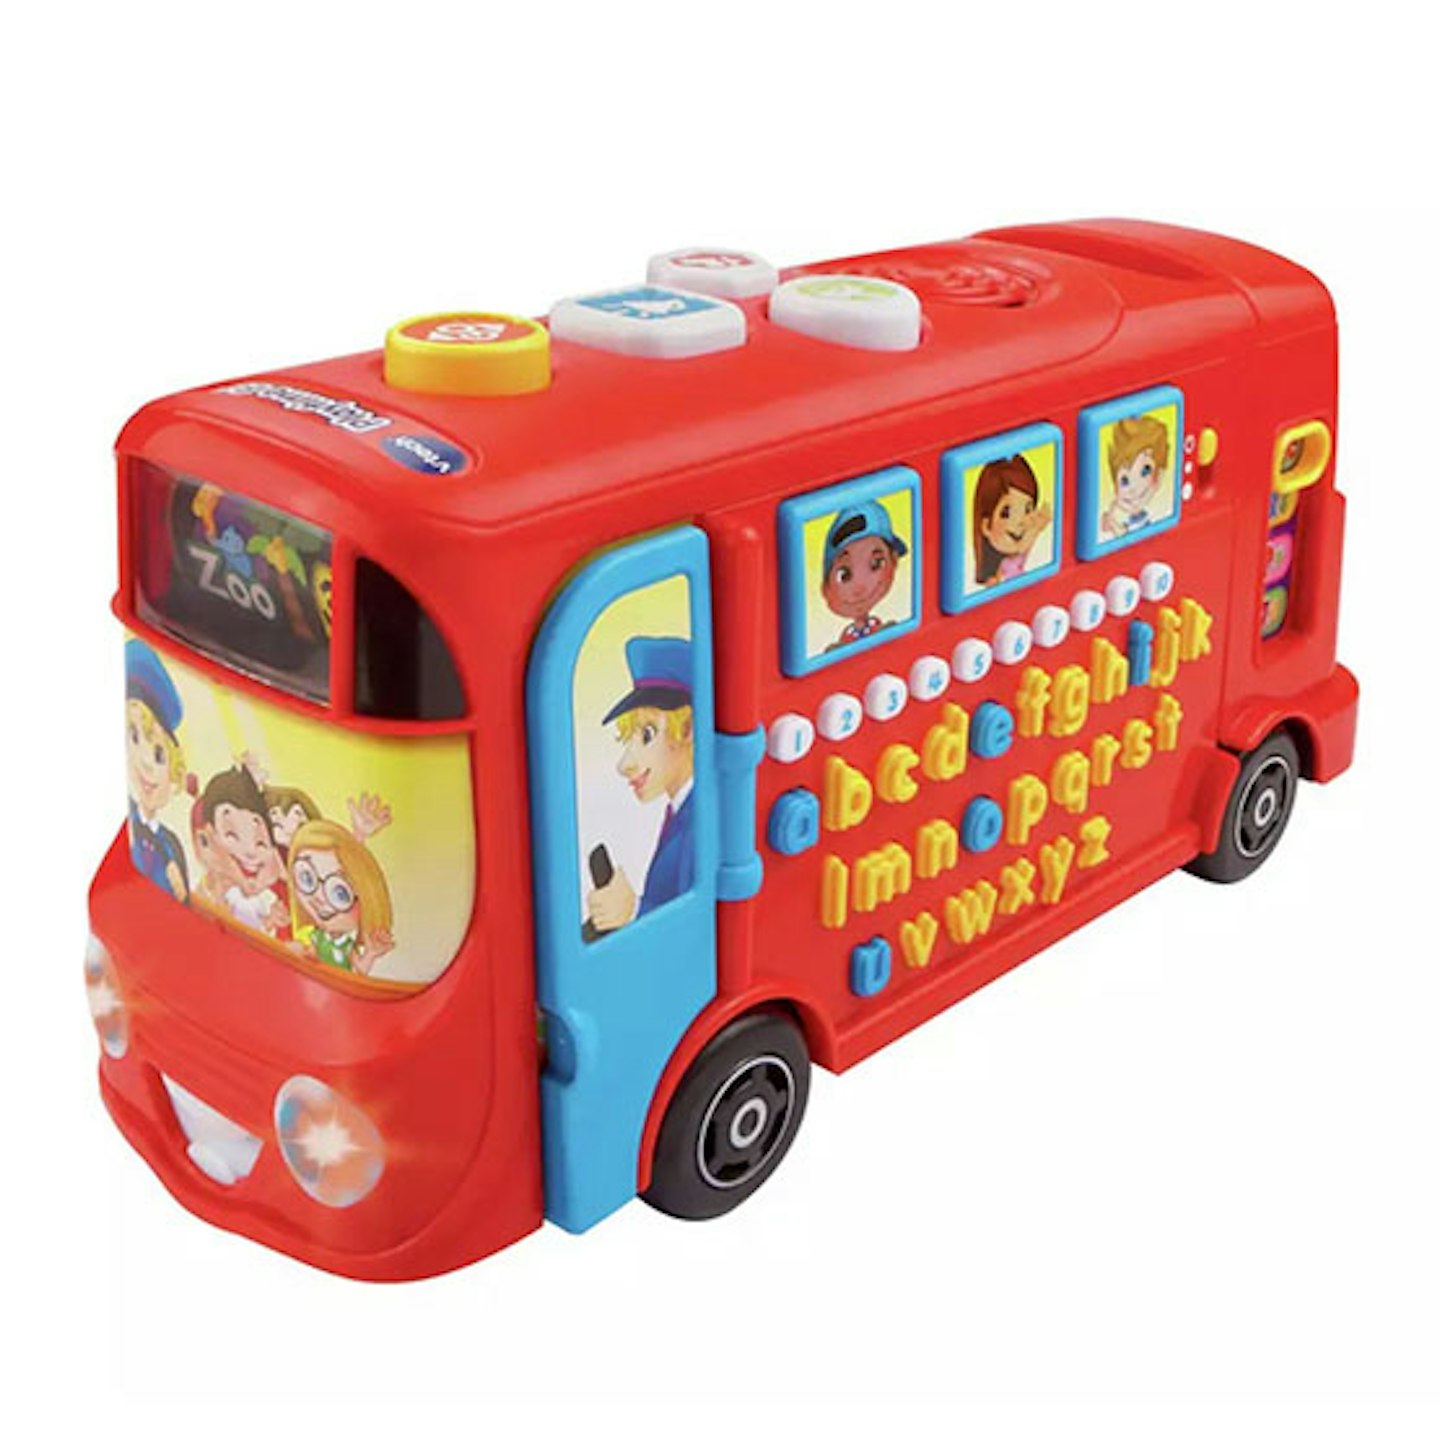 Best for learning phonics and numbers: VTech Playtime Bus with Phonics